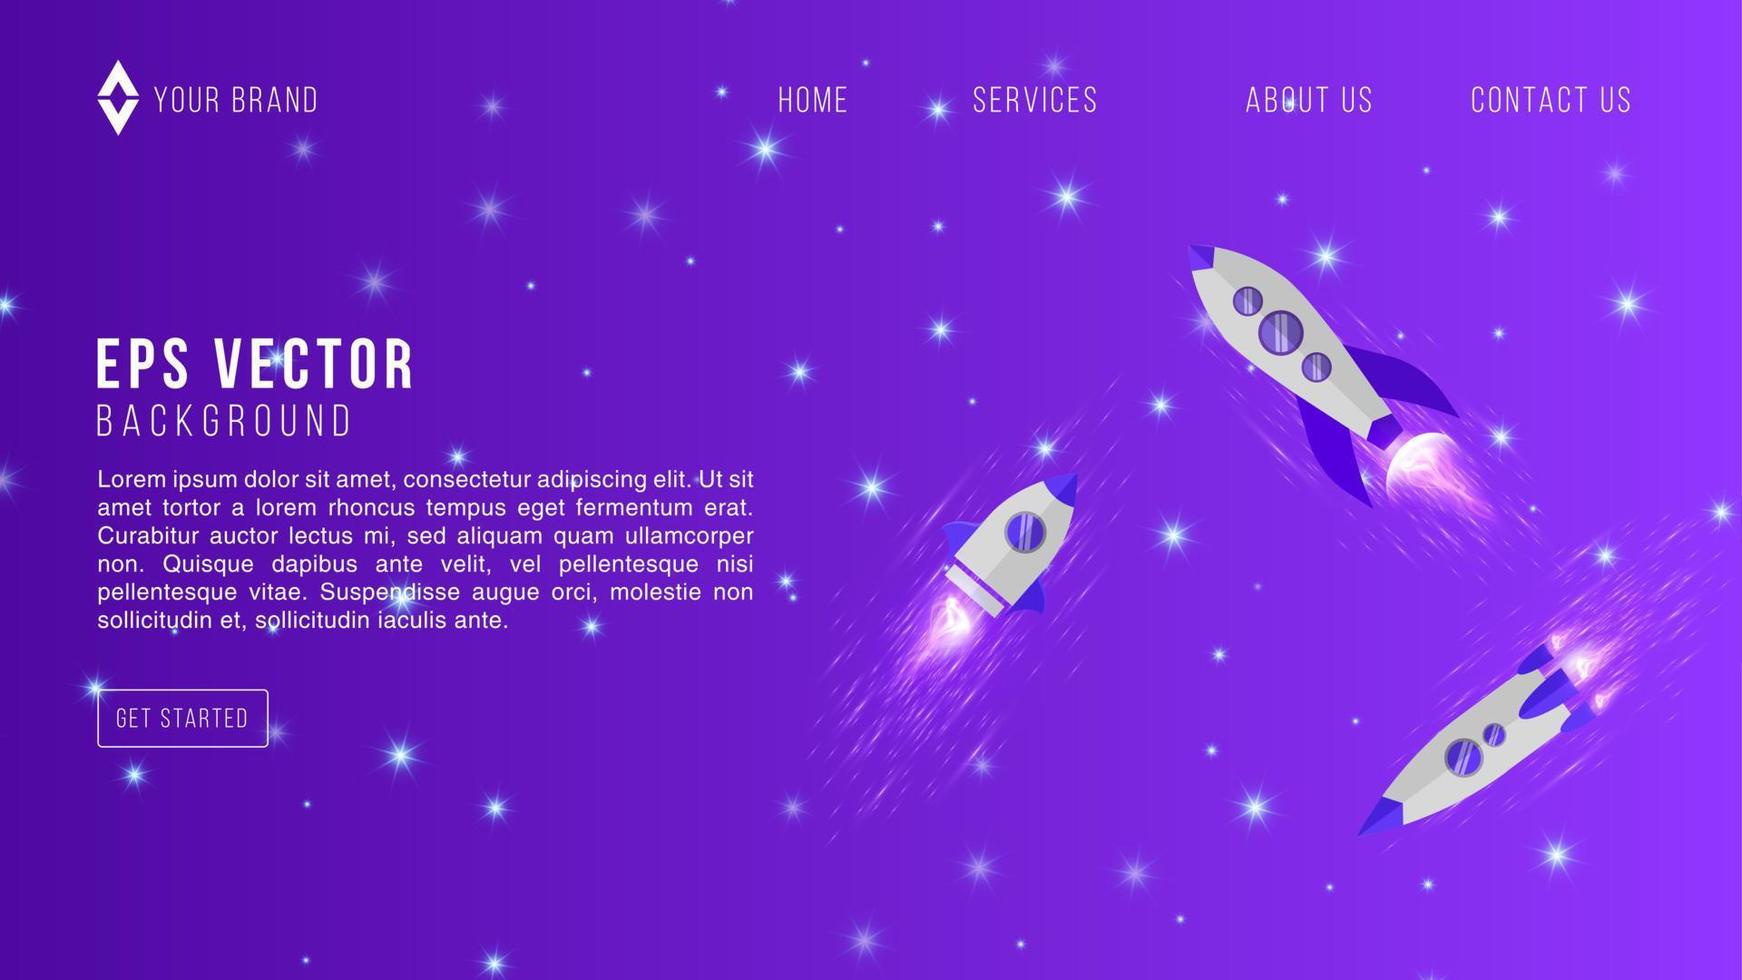 Purple Space Web Design Astronomy Galaxy Abstract Background EPS 10 Vector For Website, Landing Page, Home Page, Web Page